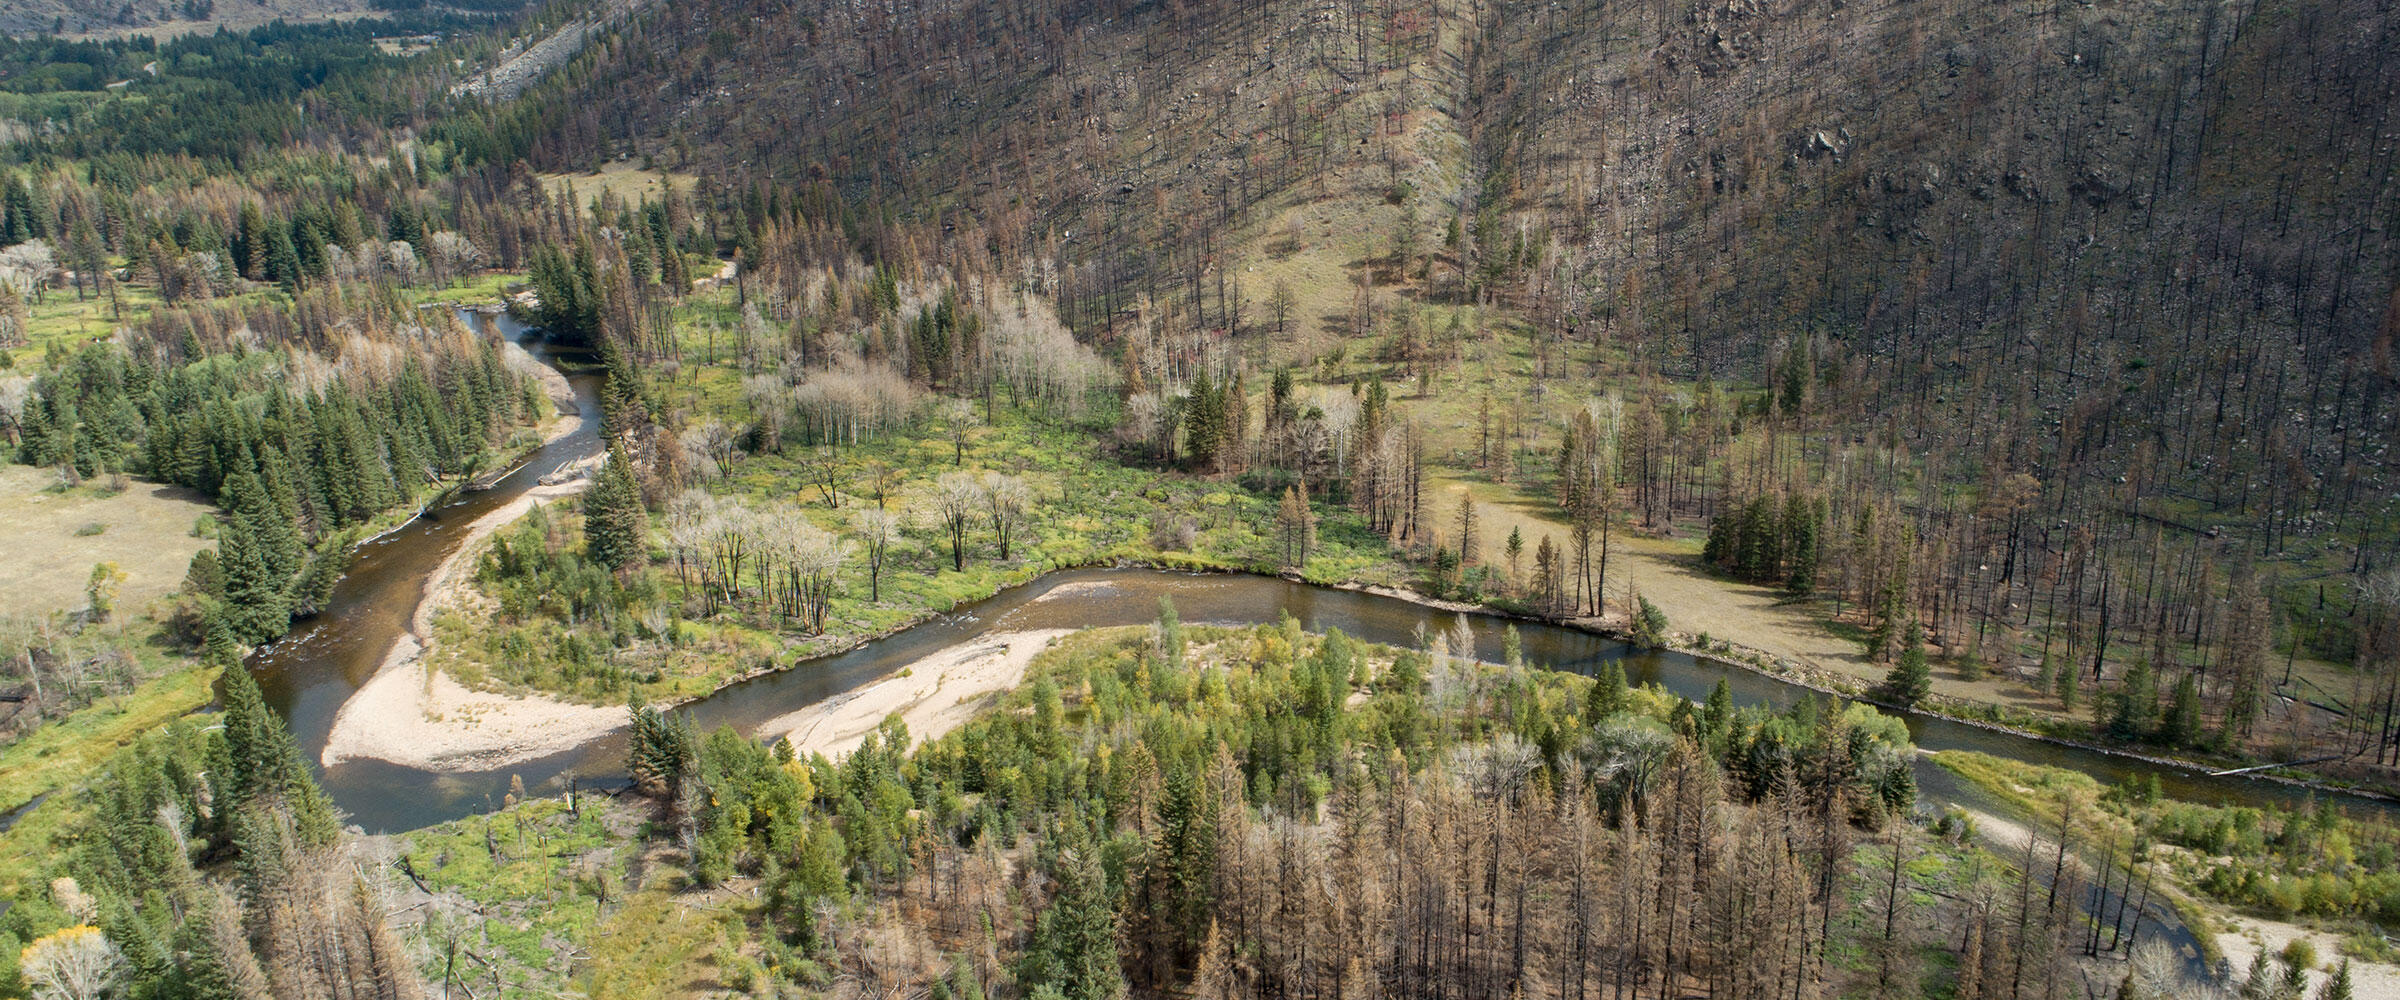 A river flows through green wetlands surrounded by burnt forest and mountain slopes.